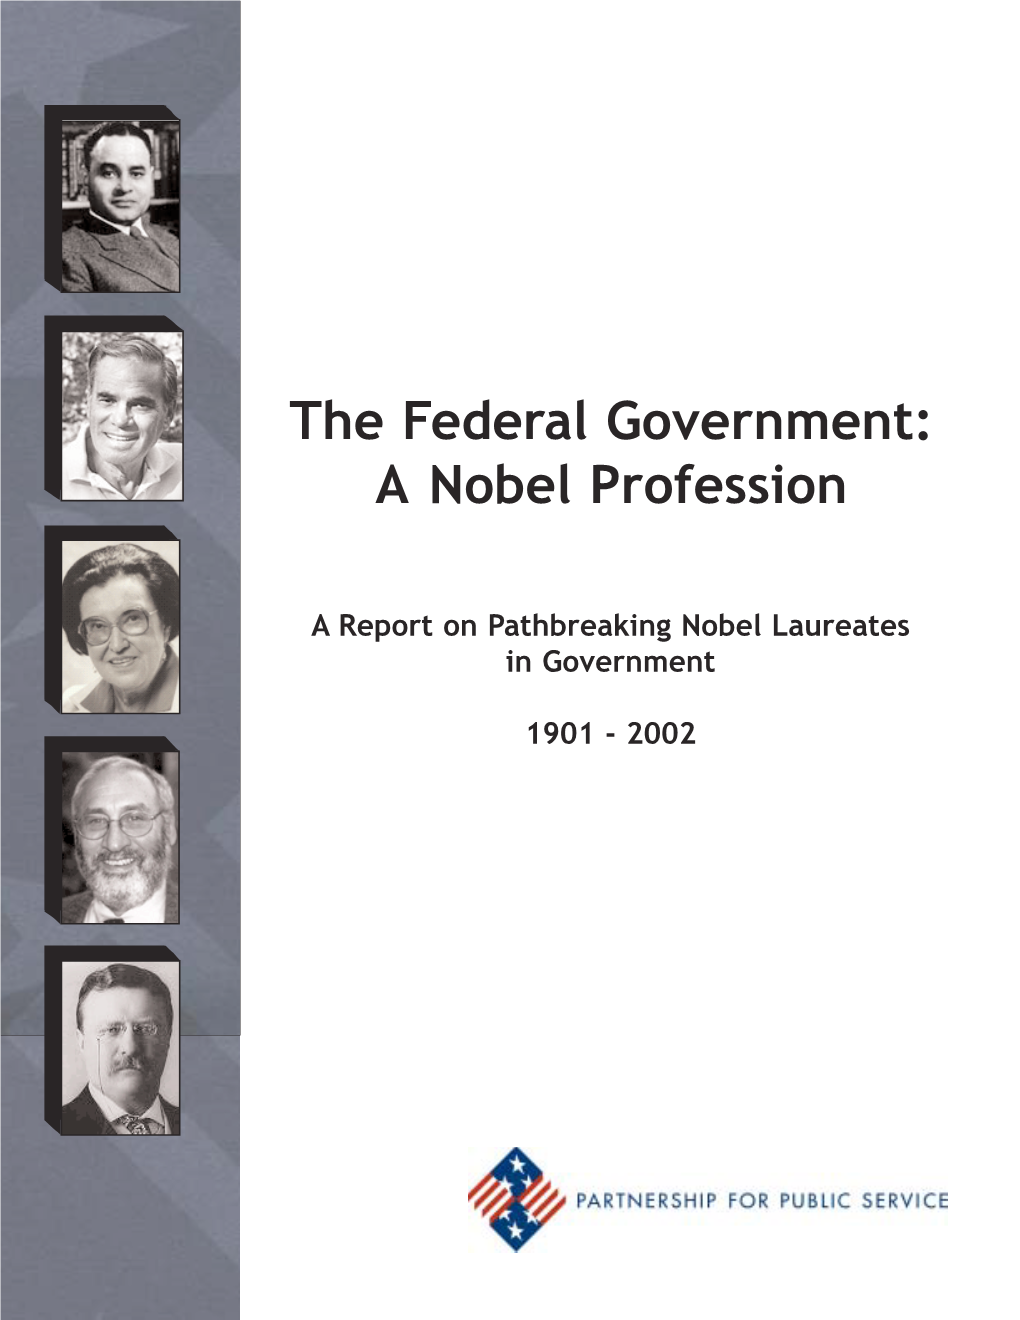 The Federal Government: a Nobel Profession